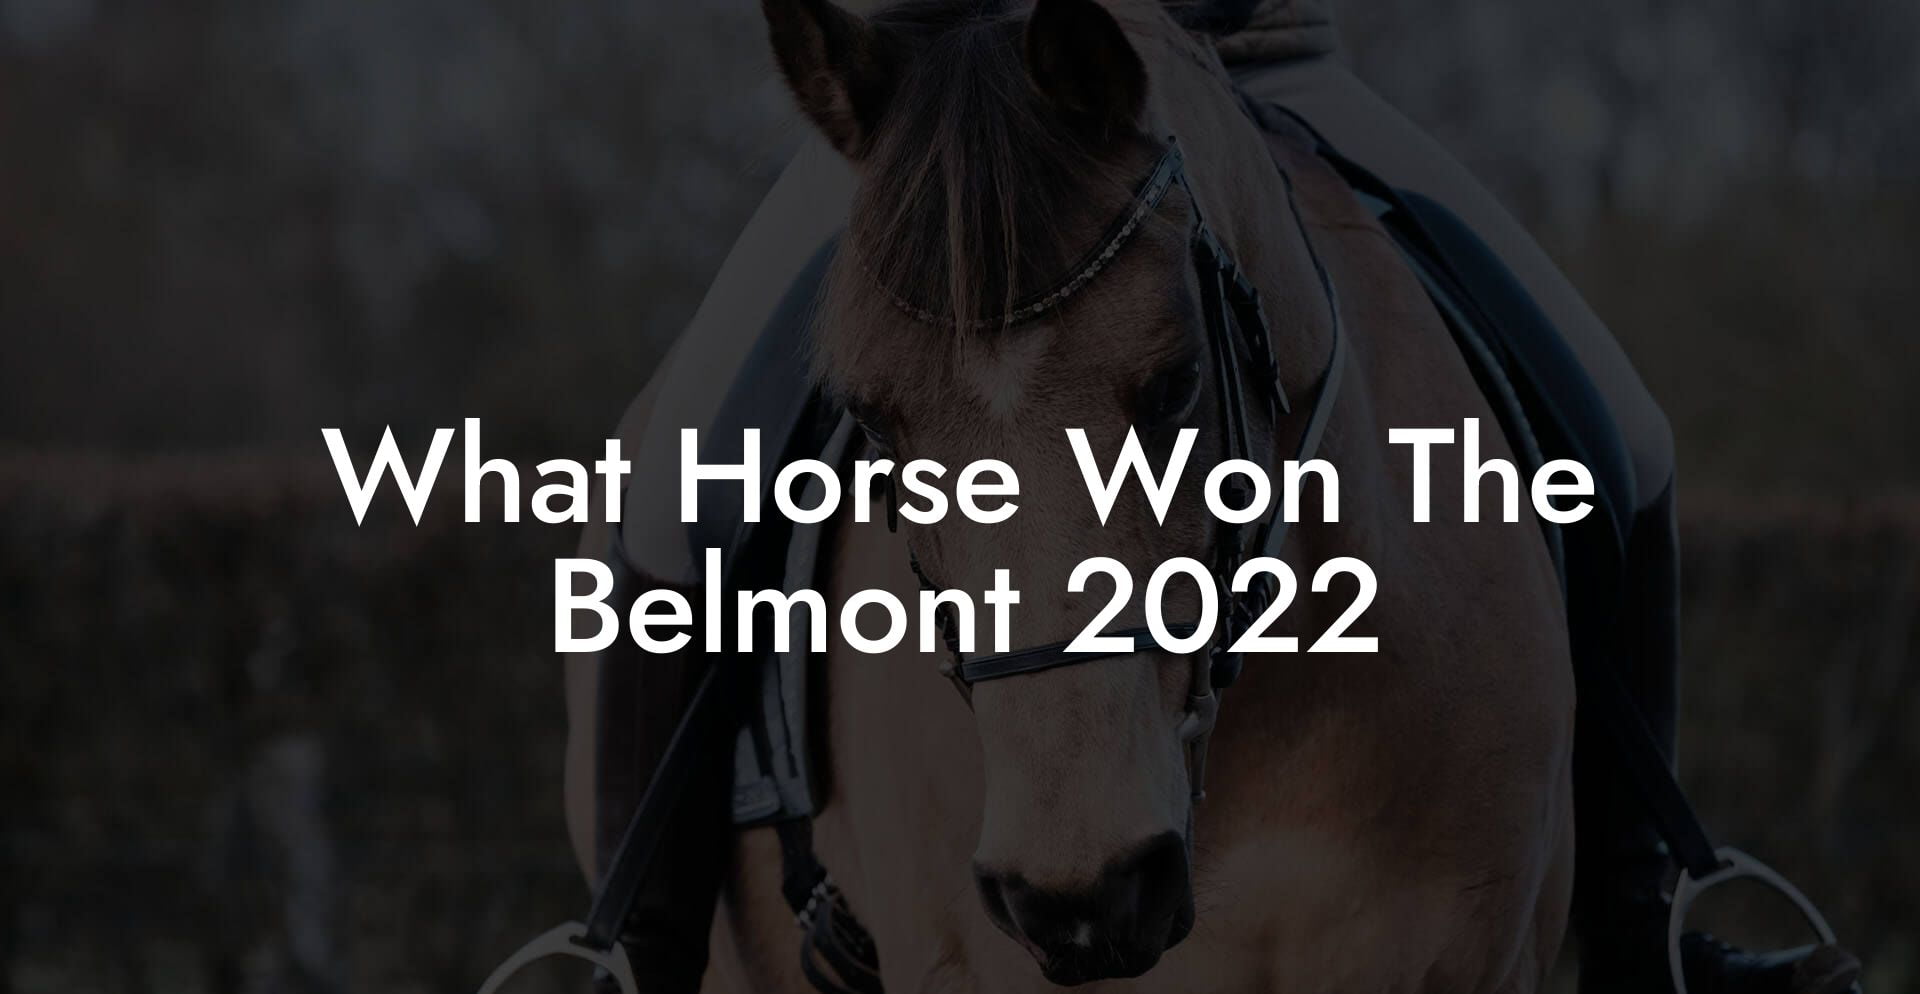 What Horse Won The Belmont 2022